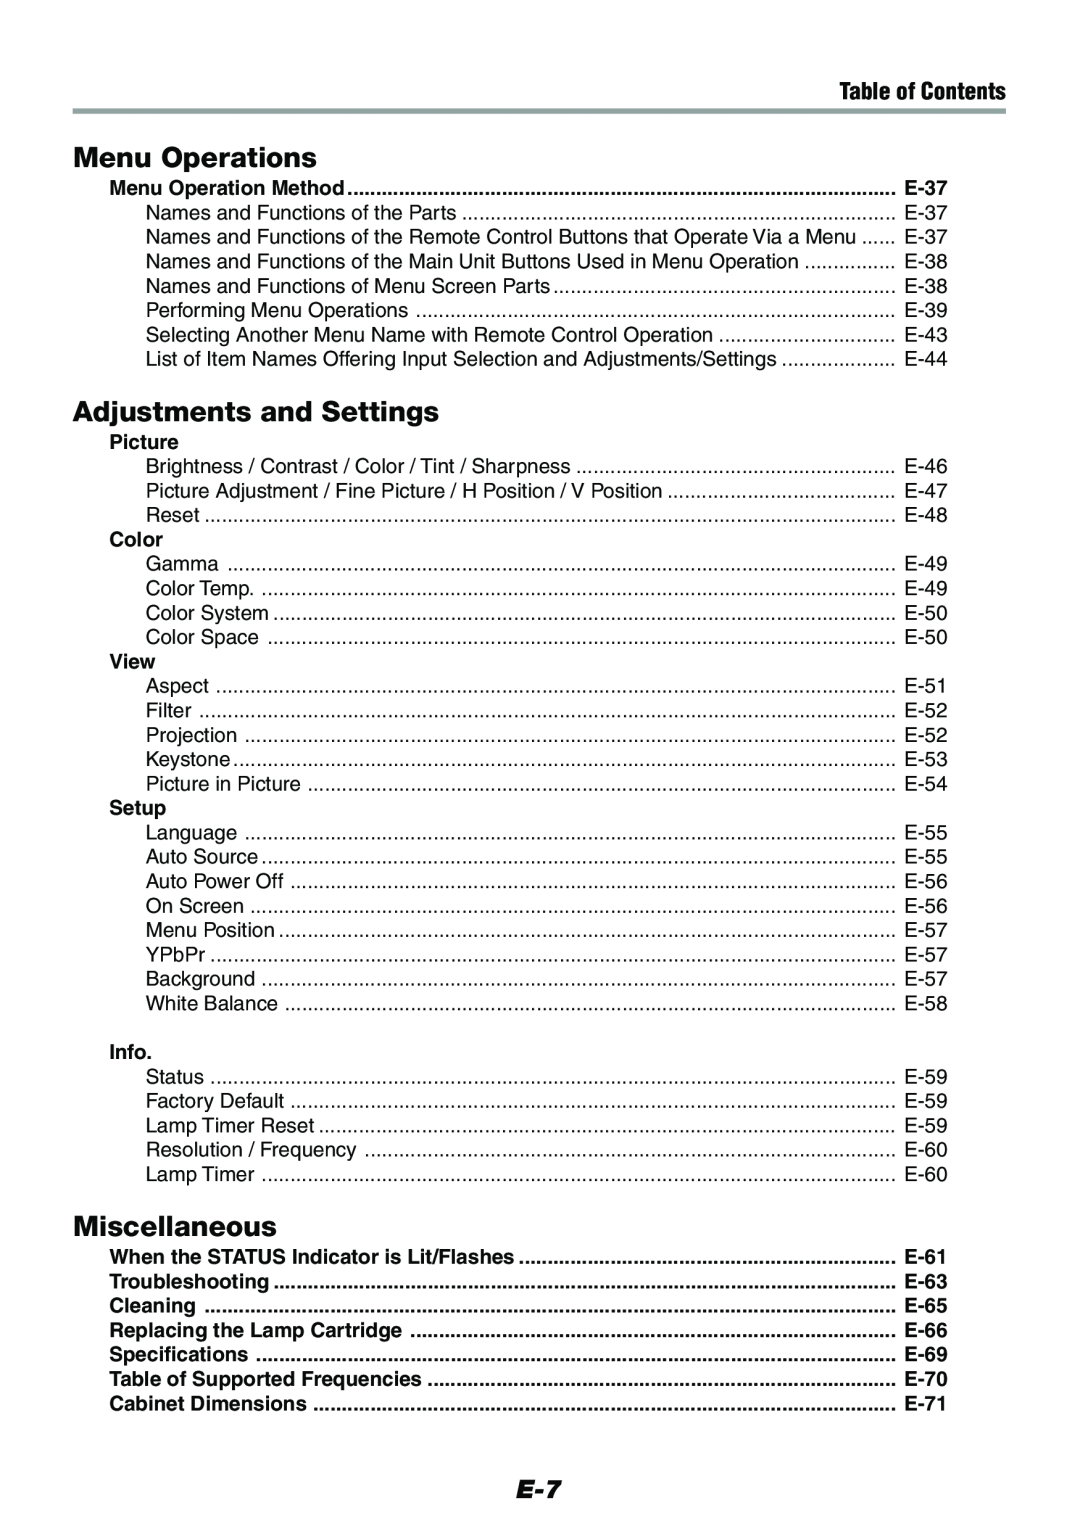 Epson V-1100 Menu Operations, Adjustments and Settings, Miscellaneous, Table of Contents, E-37, Picture, Color, View, Info 